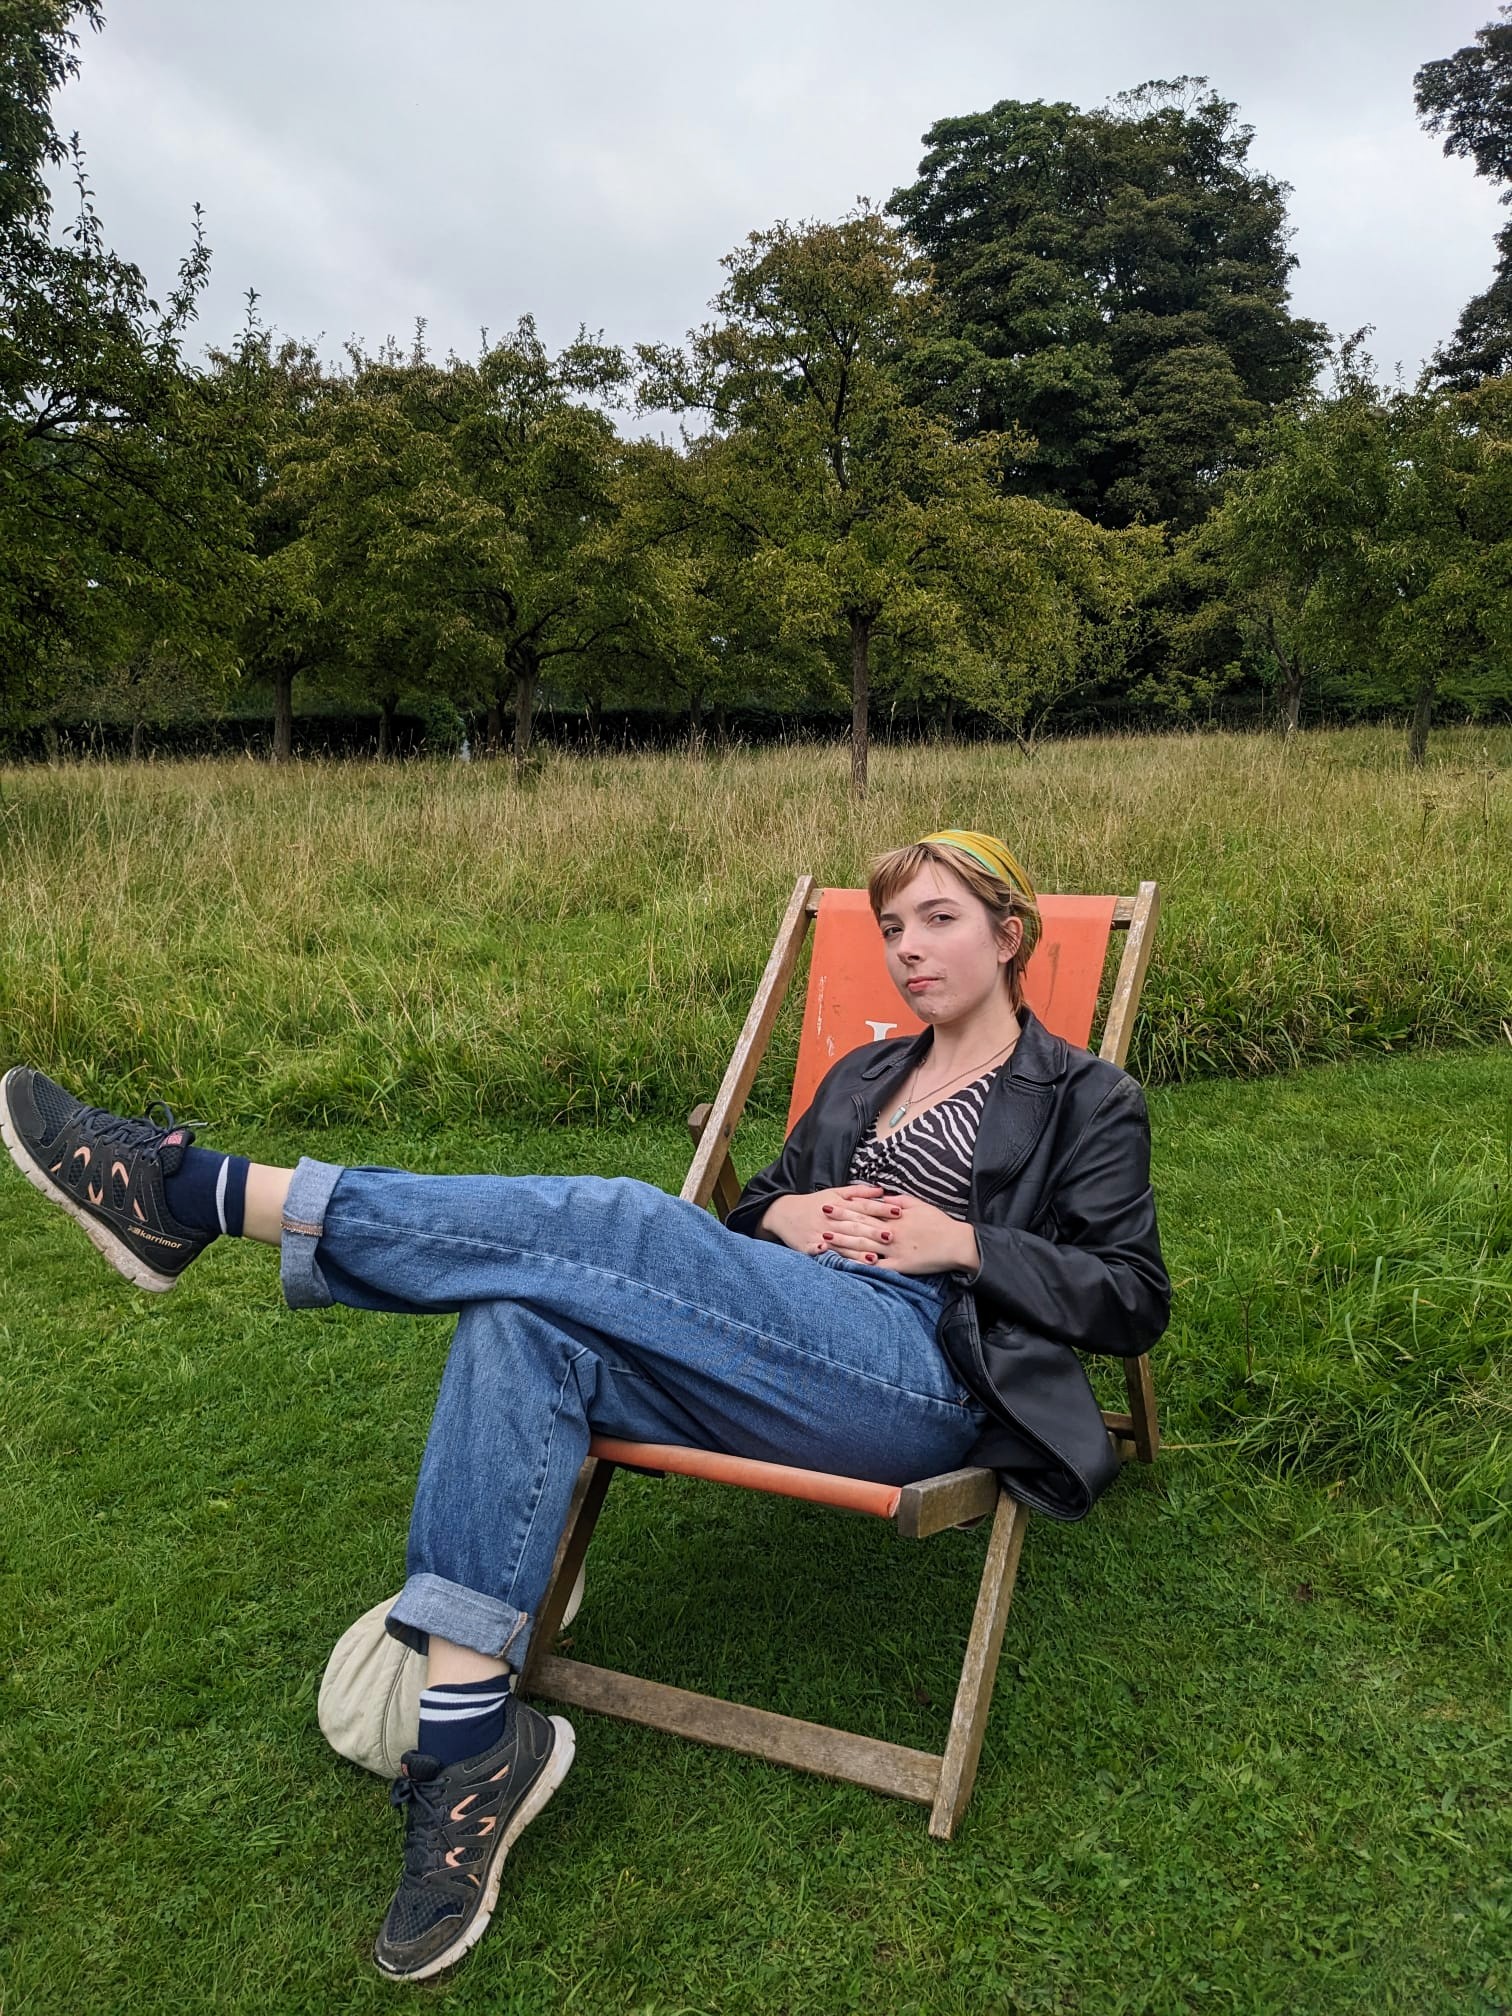 A picture of a girl sat in a chair in a field